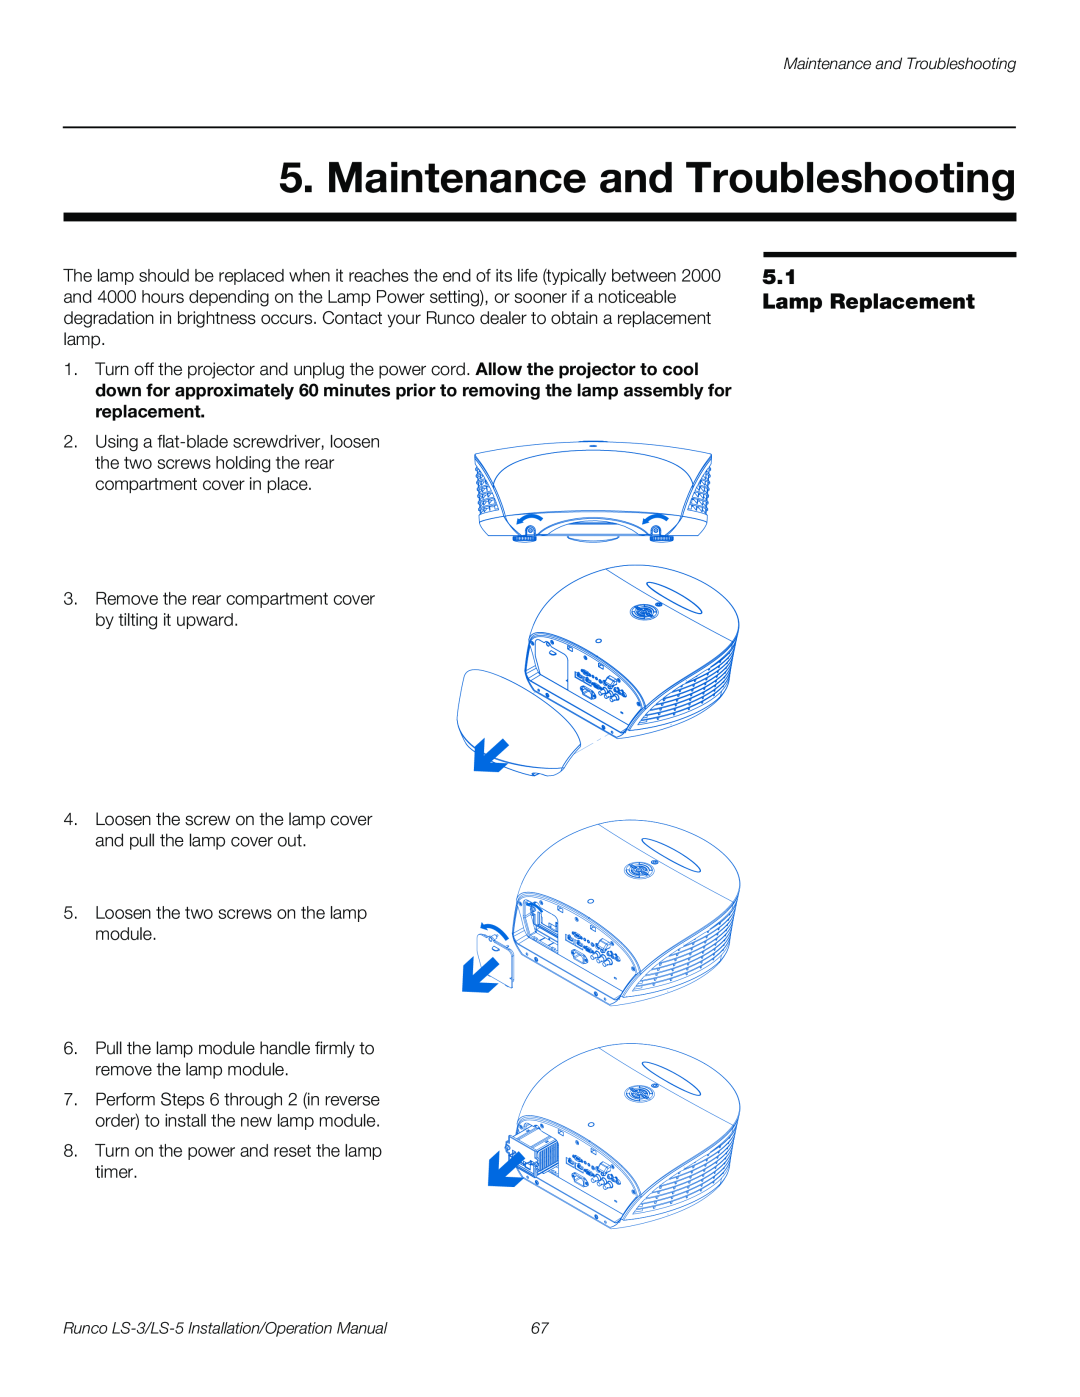 Runco LS-3, LS-5 operation manual Maintenance and Troubleshooting, Lamp Replacement 